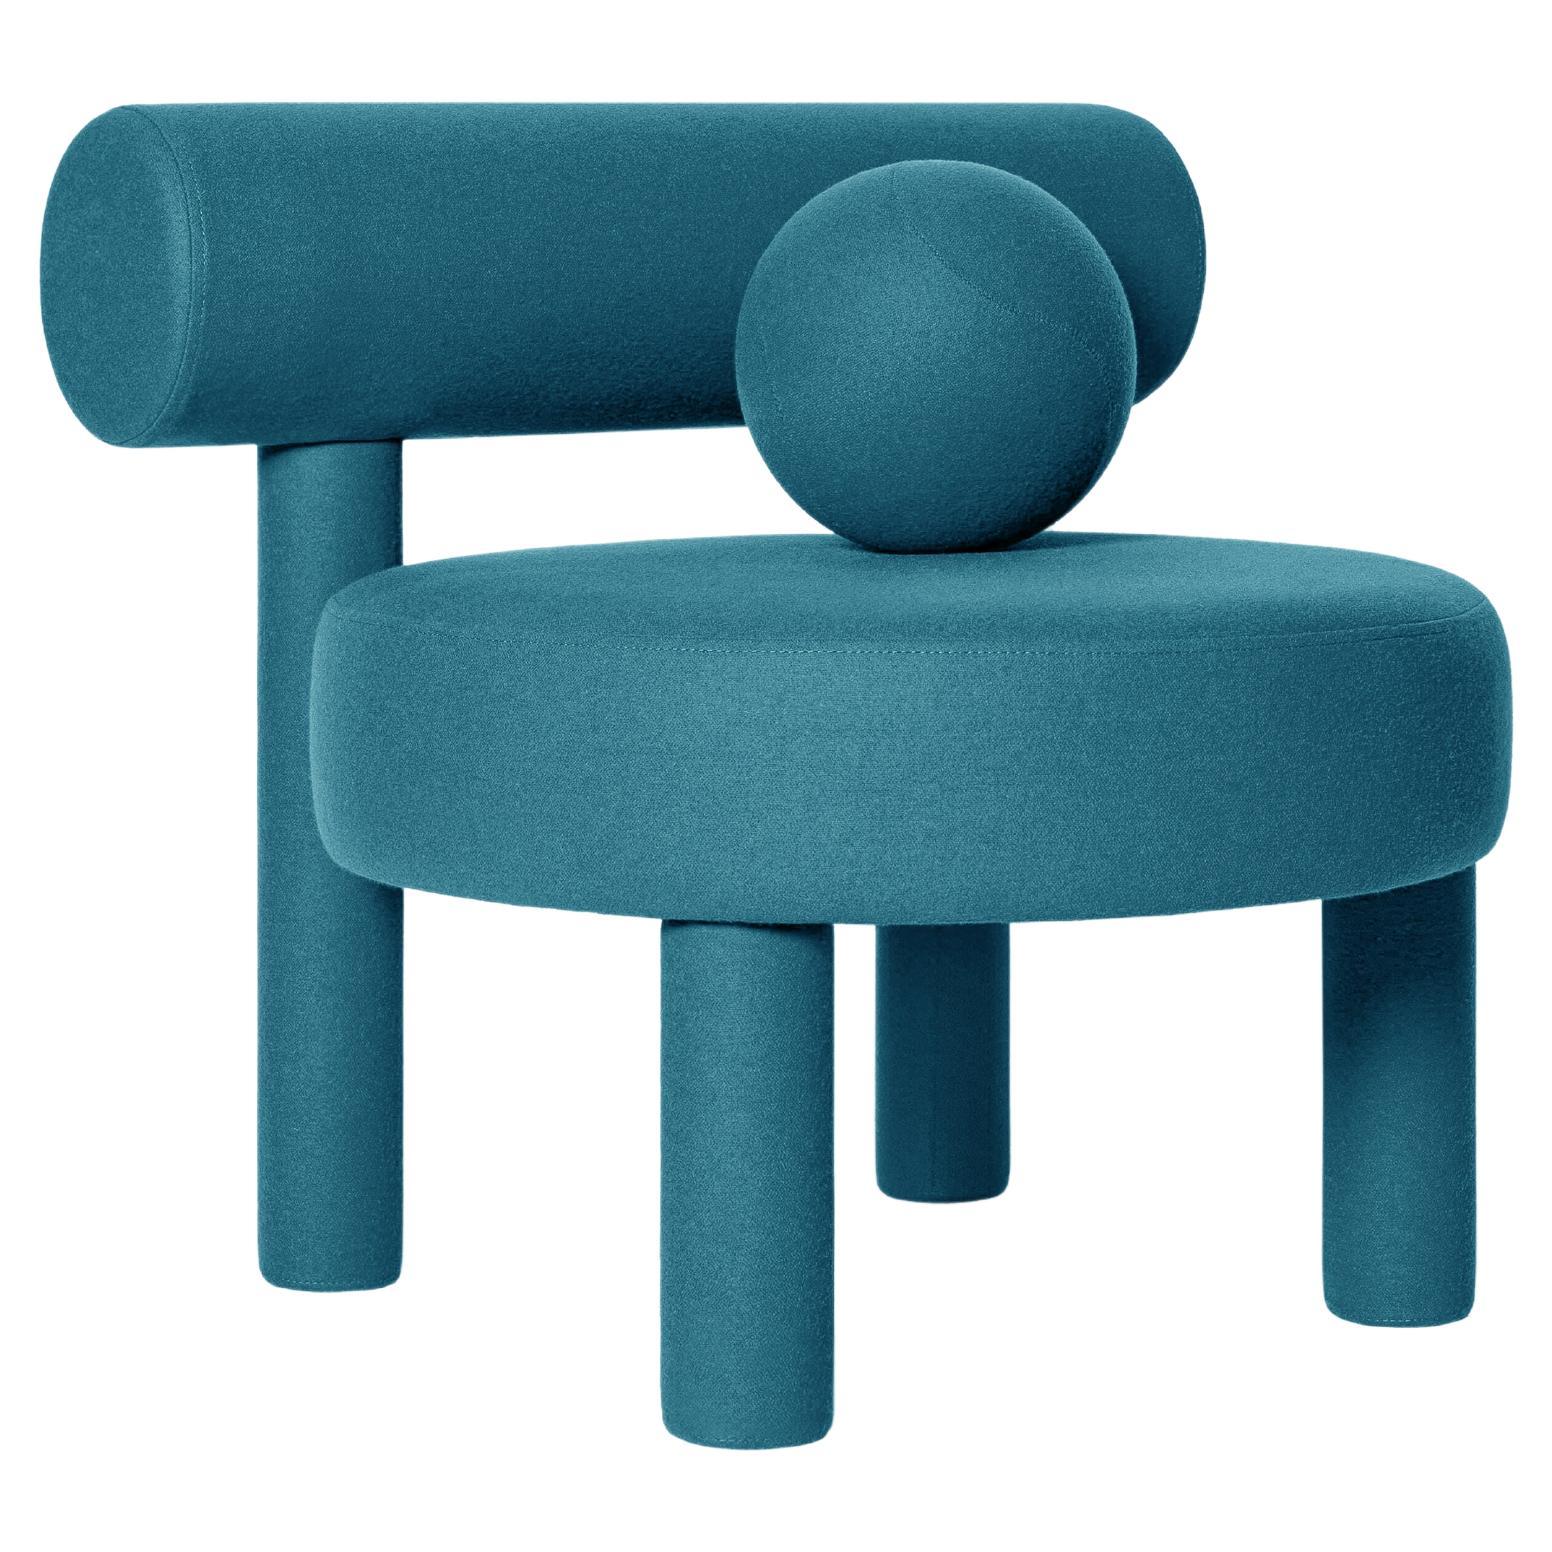 Modern Low Chair 'Gropius CS1' by Noom, Turquoise For Sale